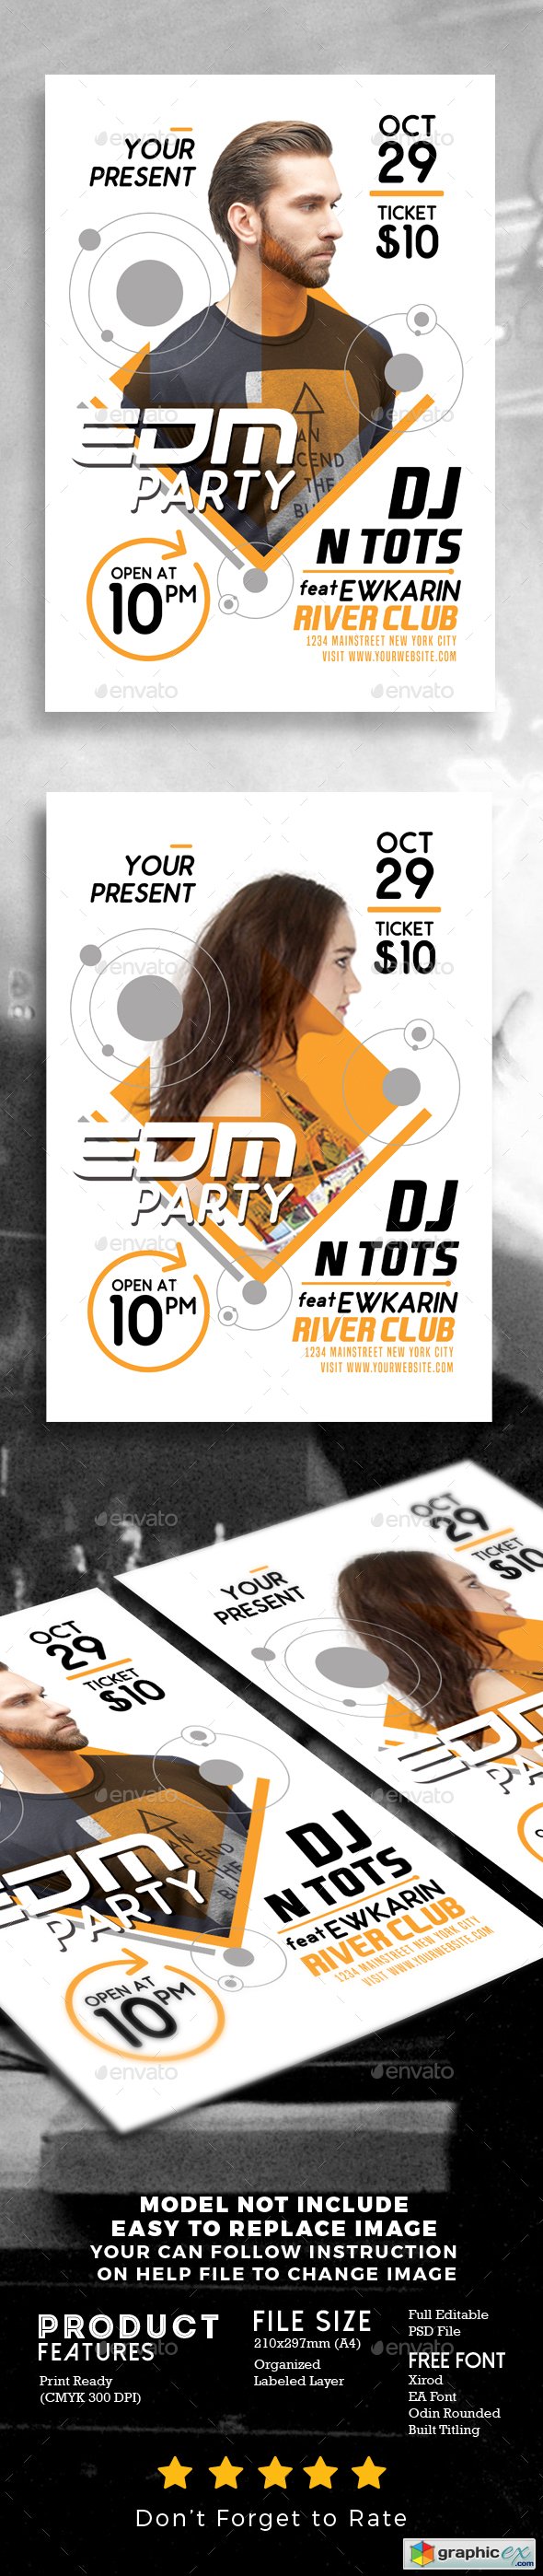 EDM Party Flyer Template